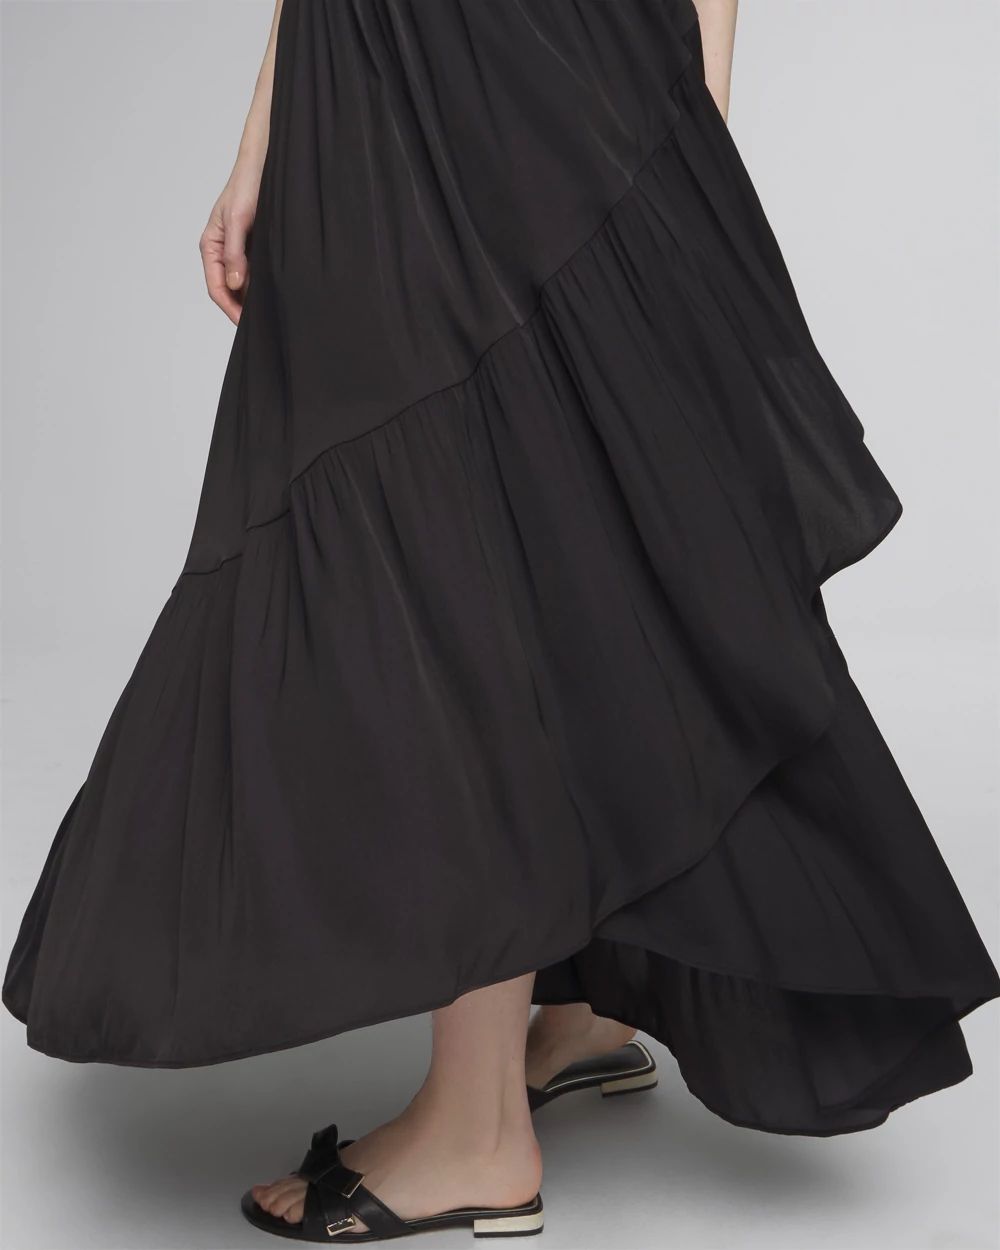 Ruffle Midi Skirt click to view larger image.